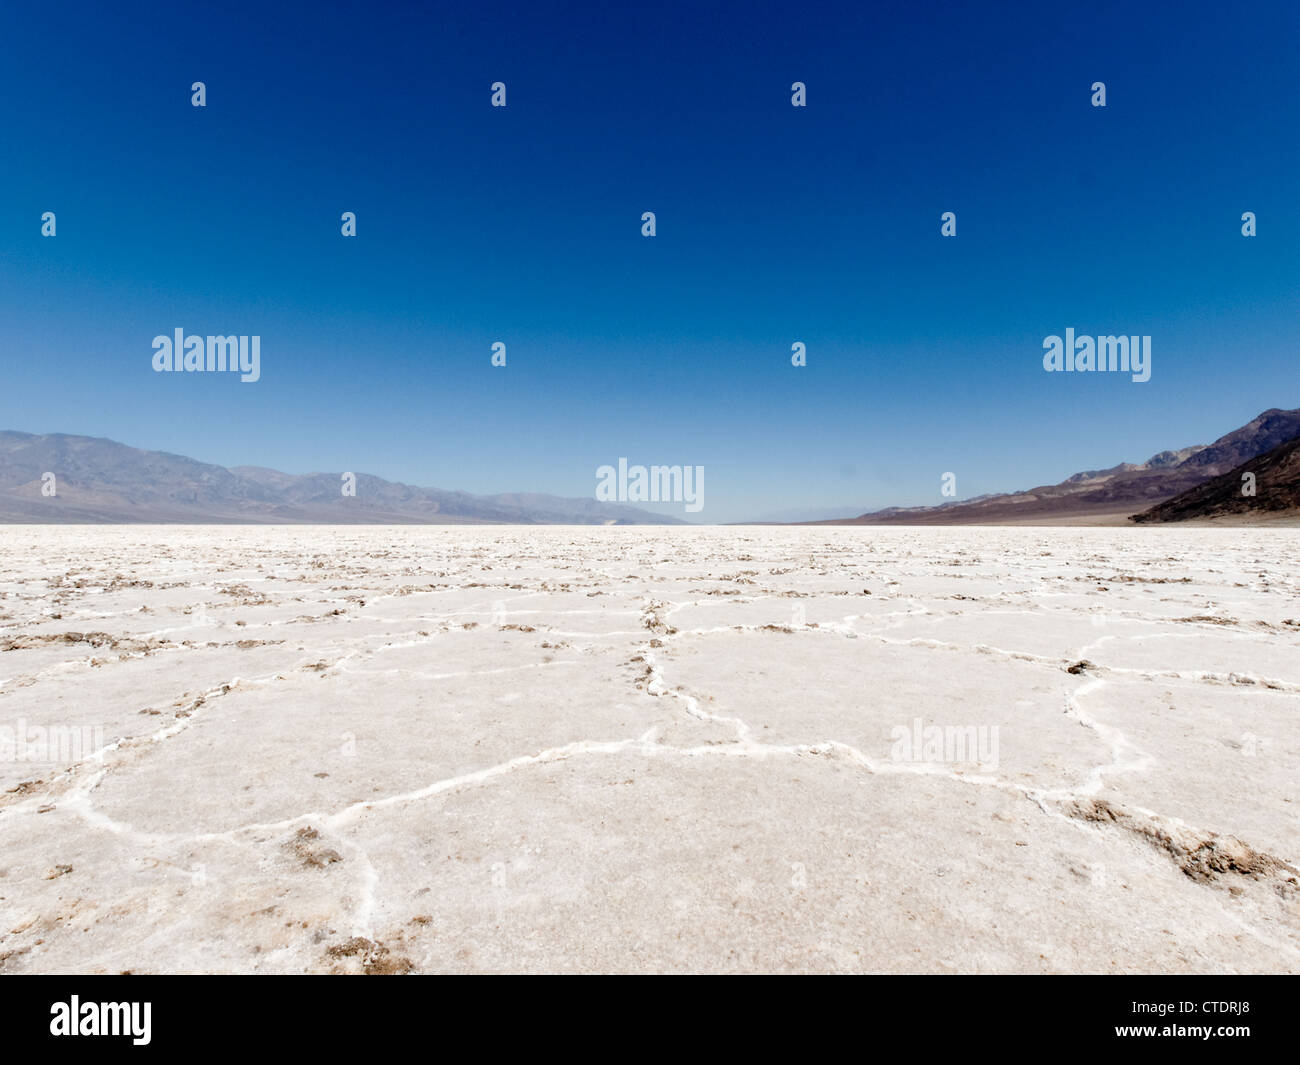 Salt flats in Badwater Basin, Death Valley, California, United States. Stock Photo